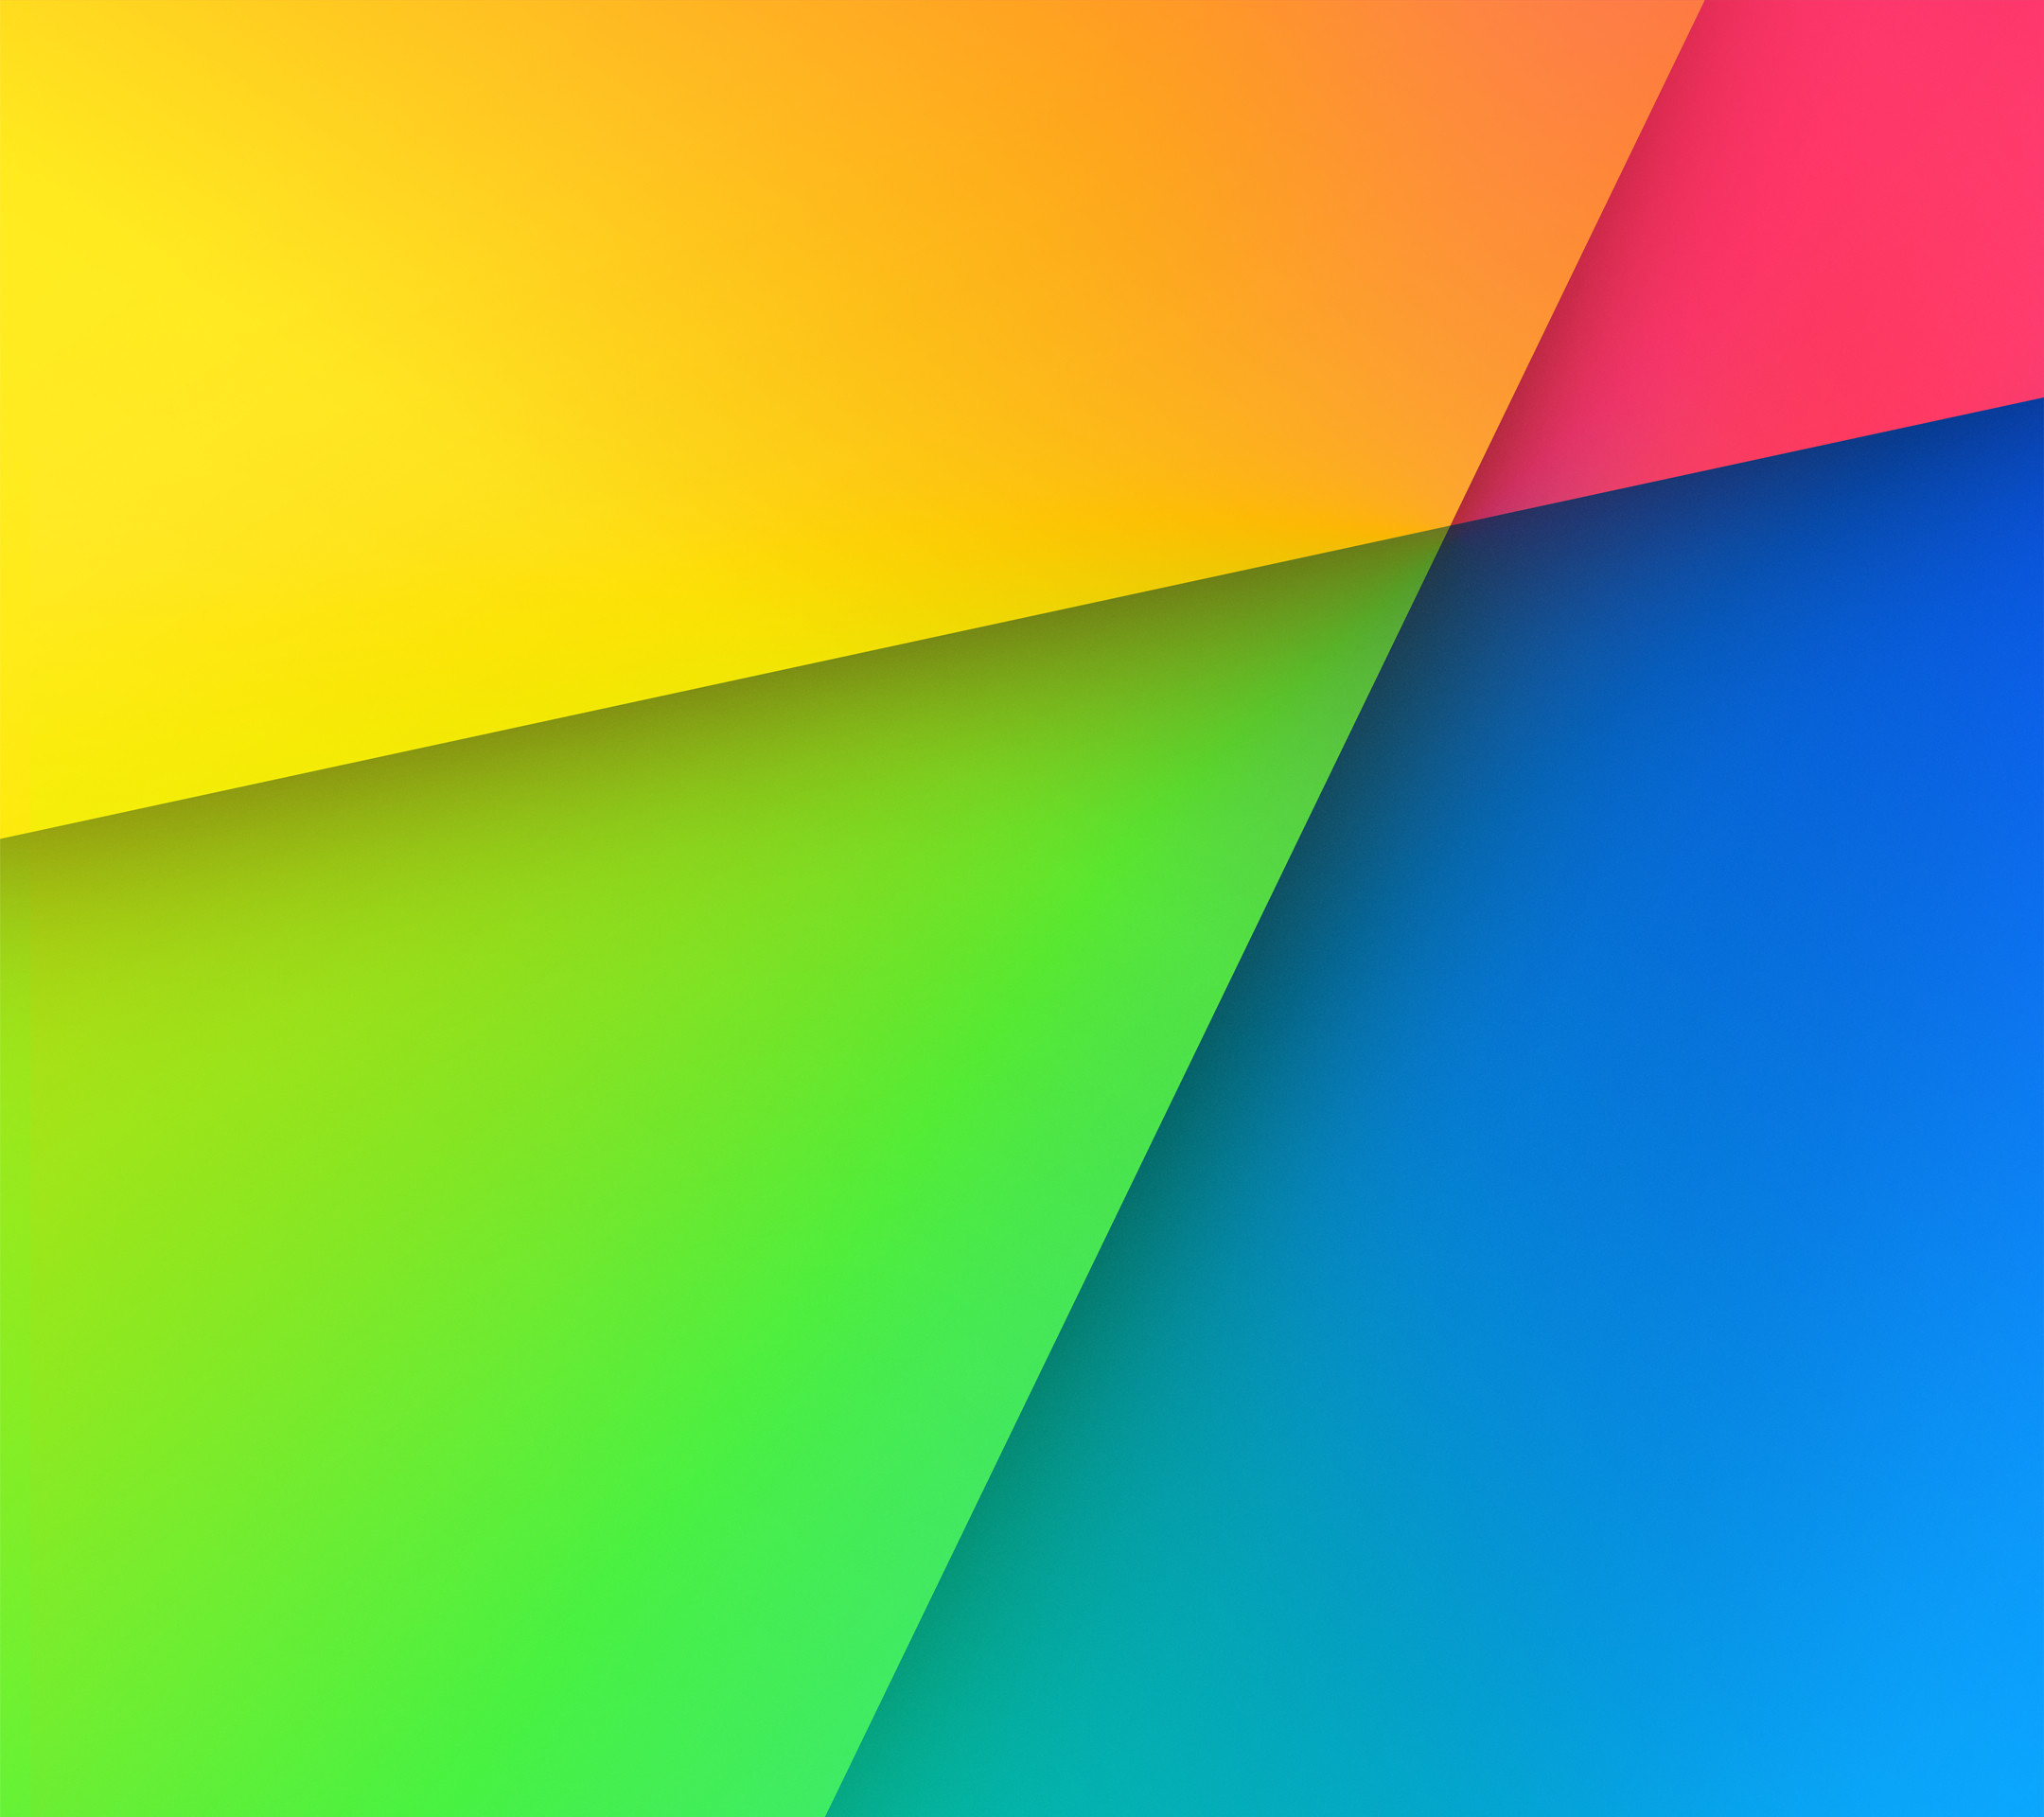 2160x1920 Download New Nexus 7 and Android 4.3 Wallpapers. [HD] | AxeeTech